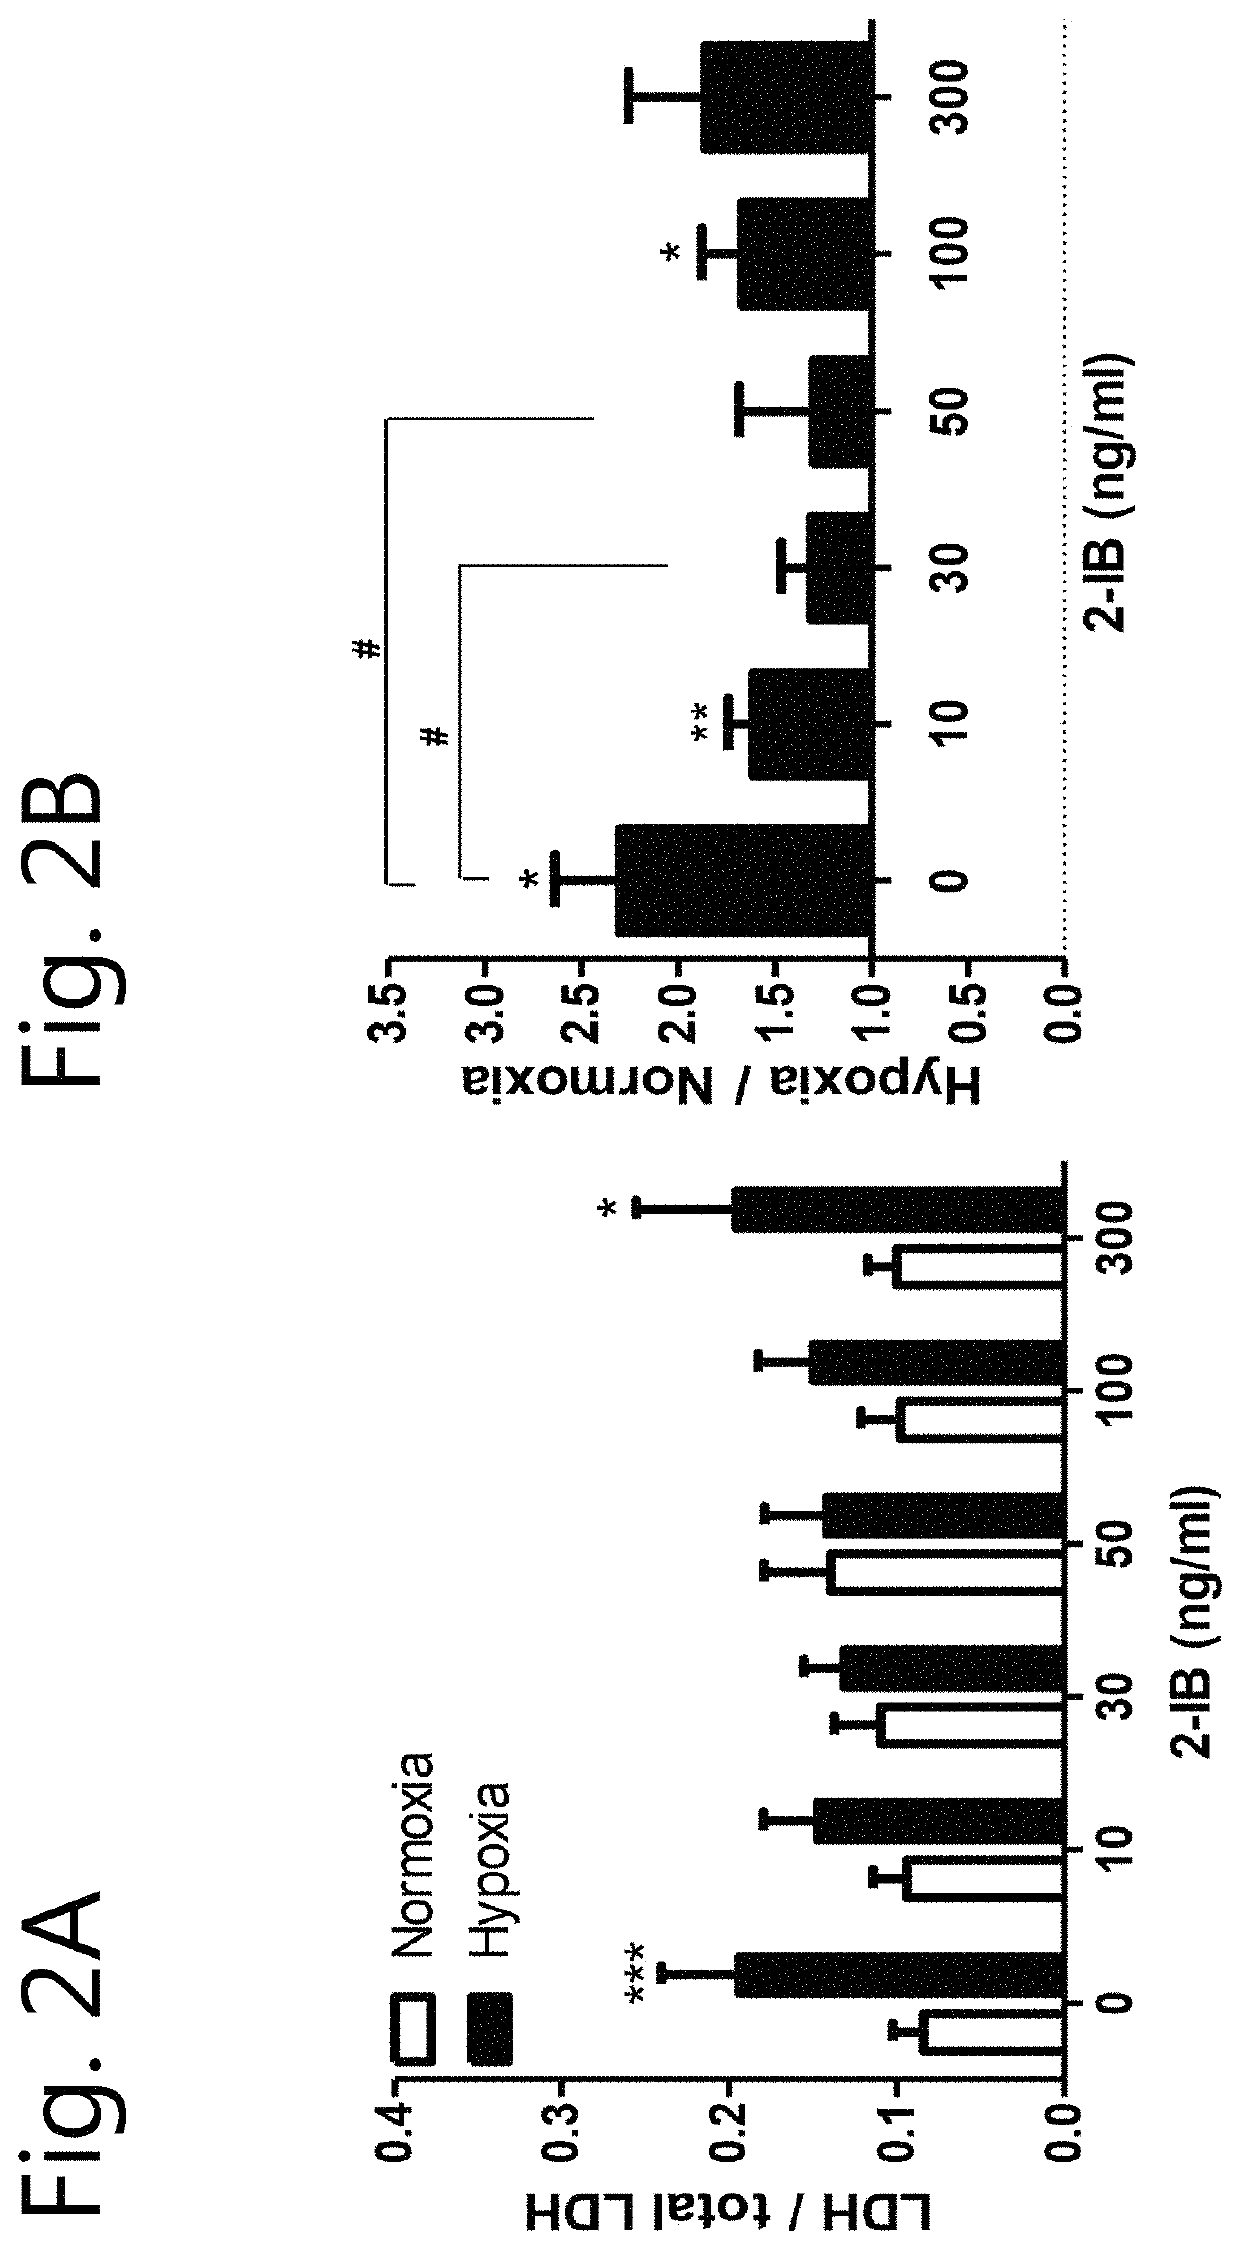 2-iminobiotin for use in the treatment of brain cell injury